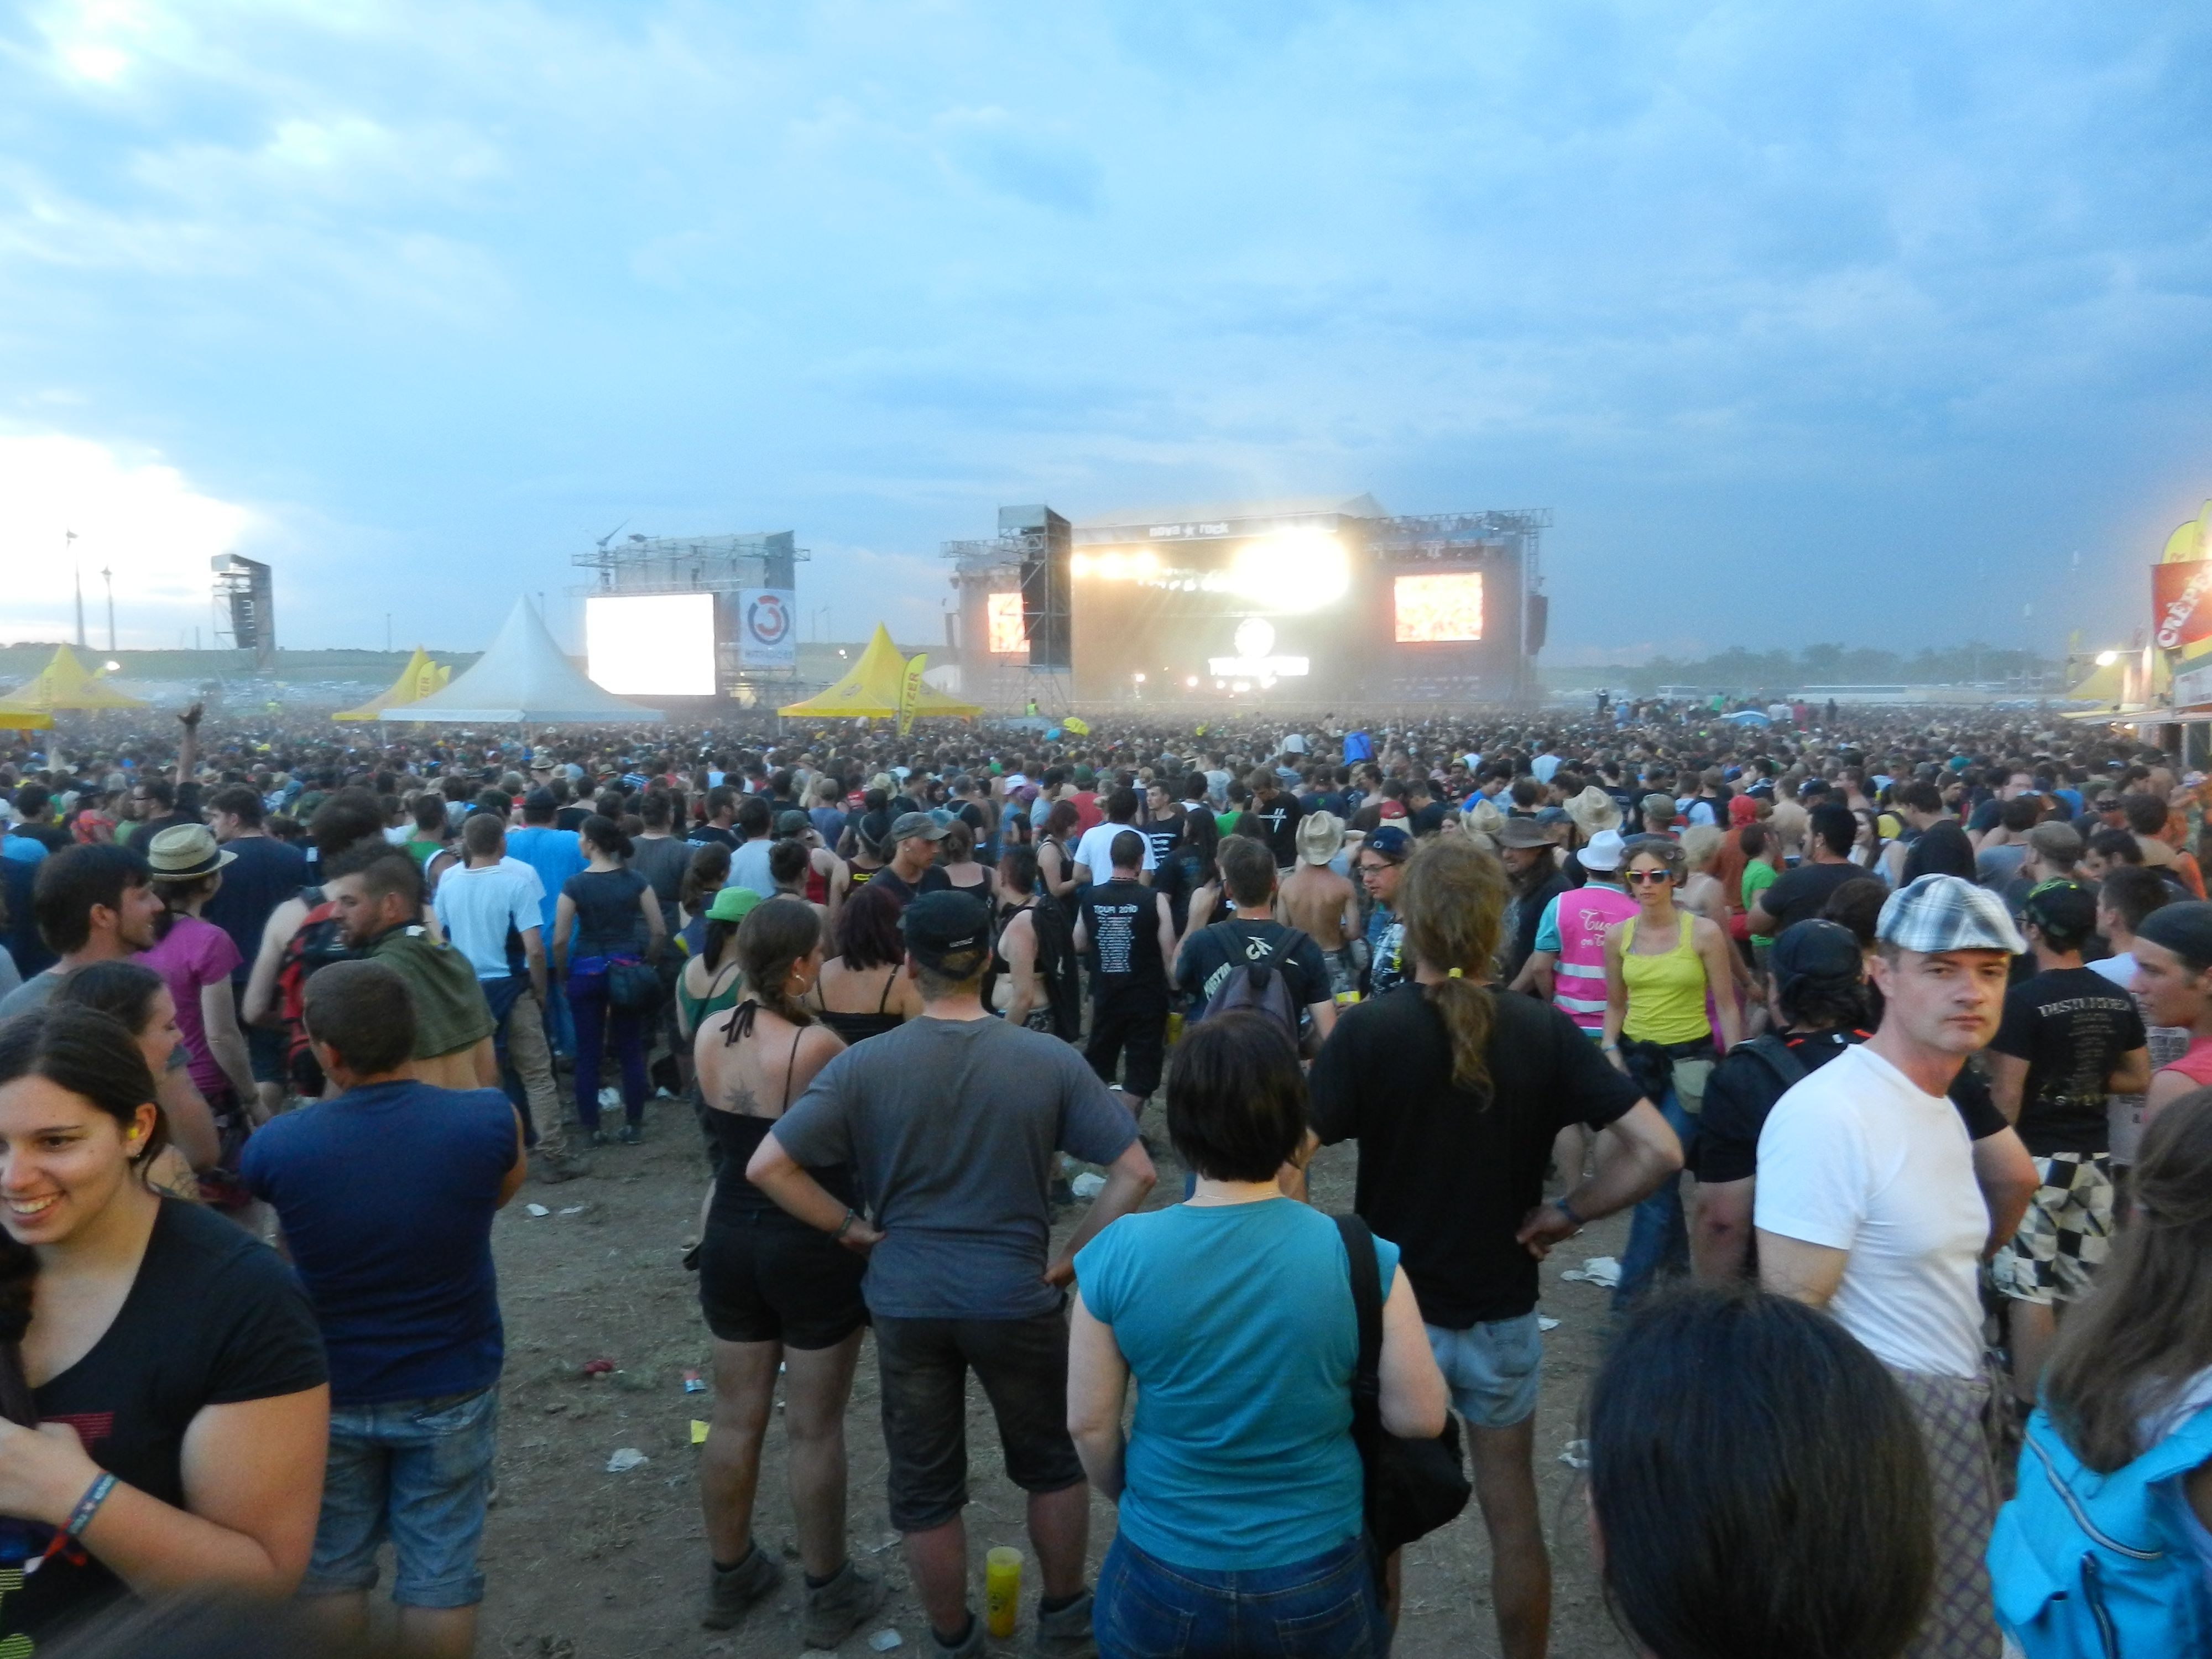 Crowd at an open air concert in front of the stage